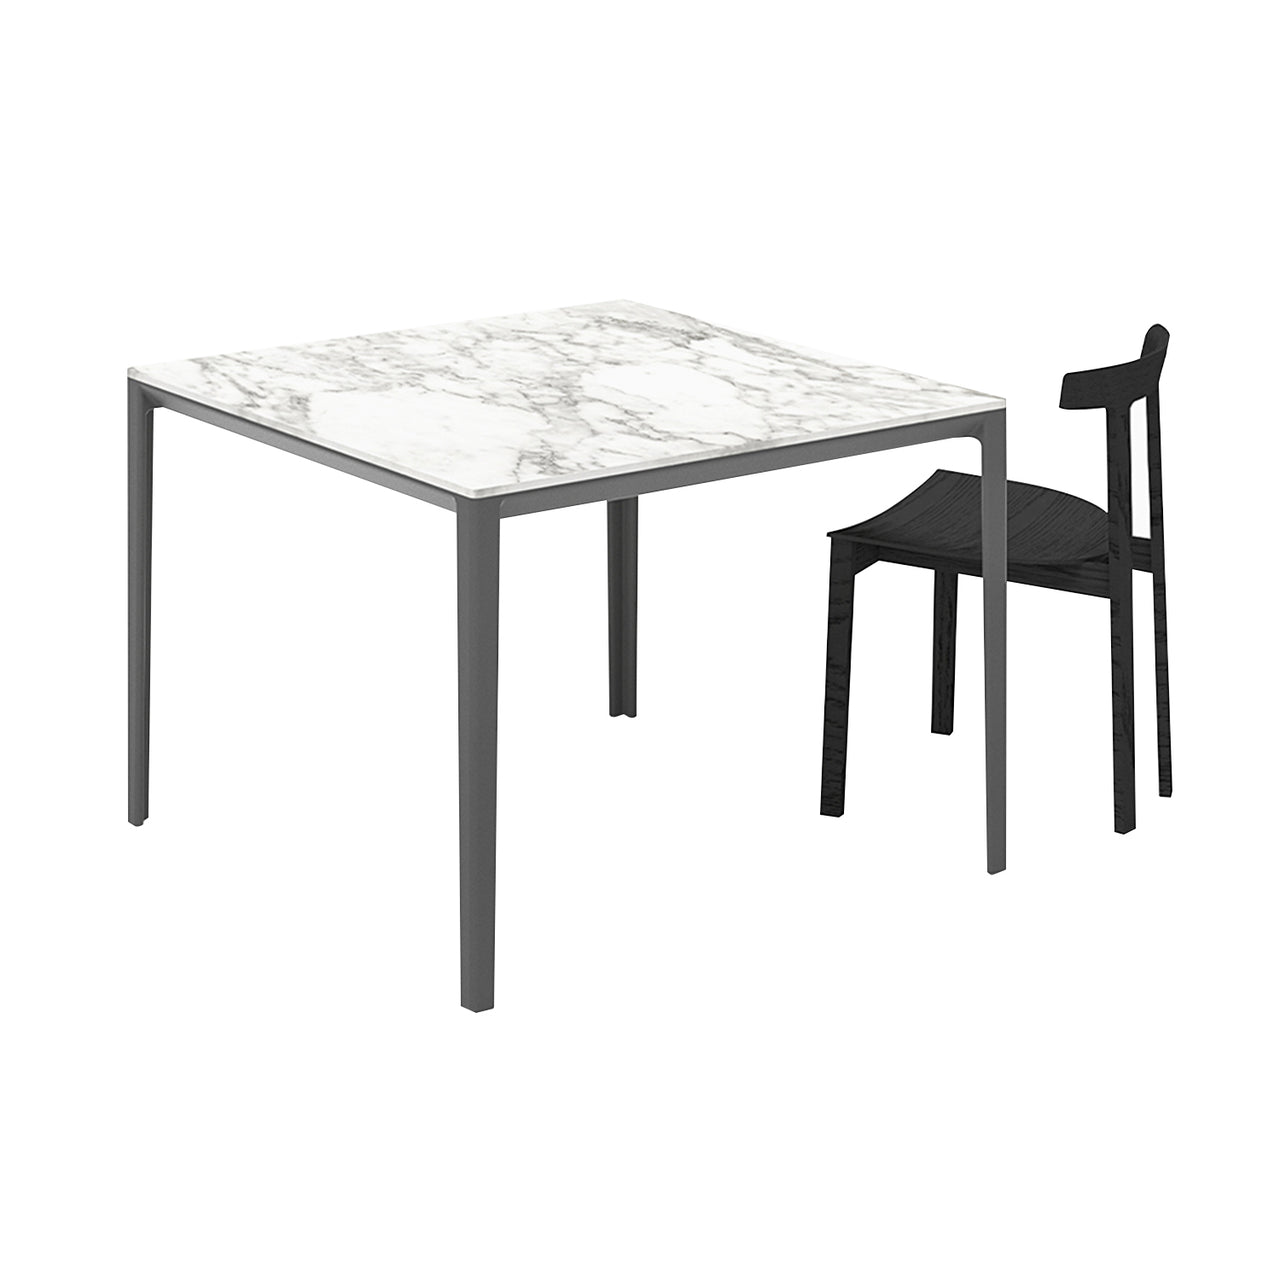 Able Dining Table: Square